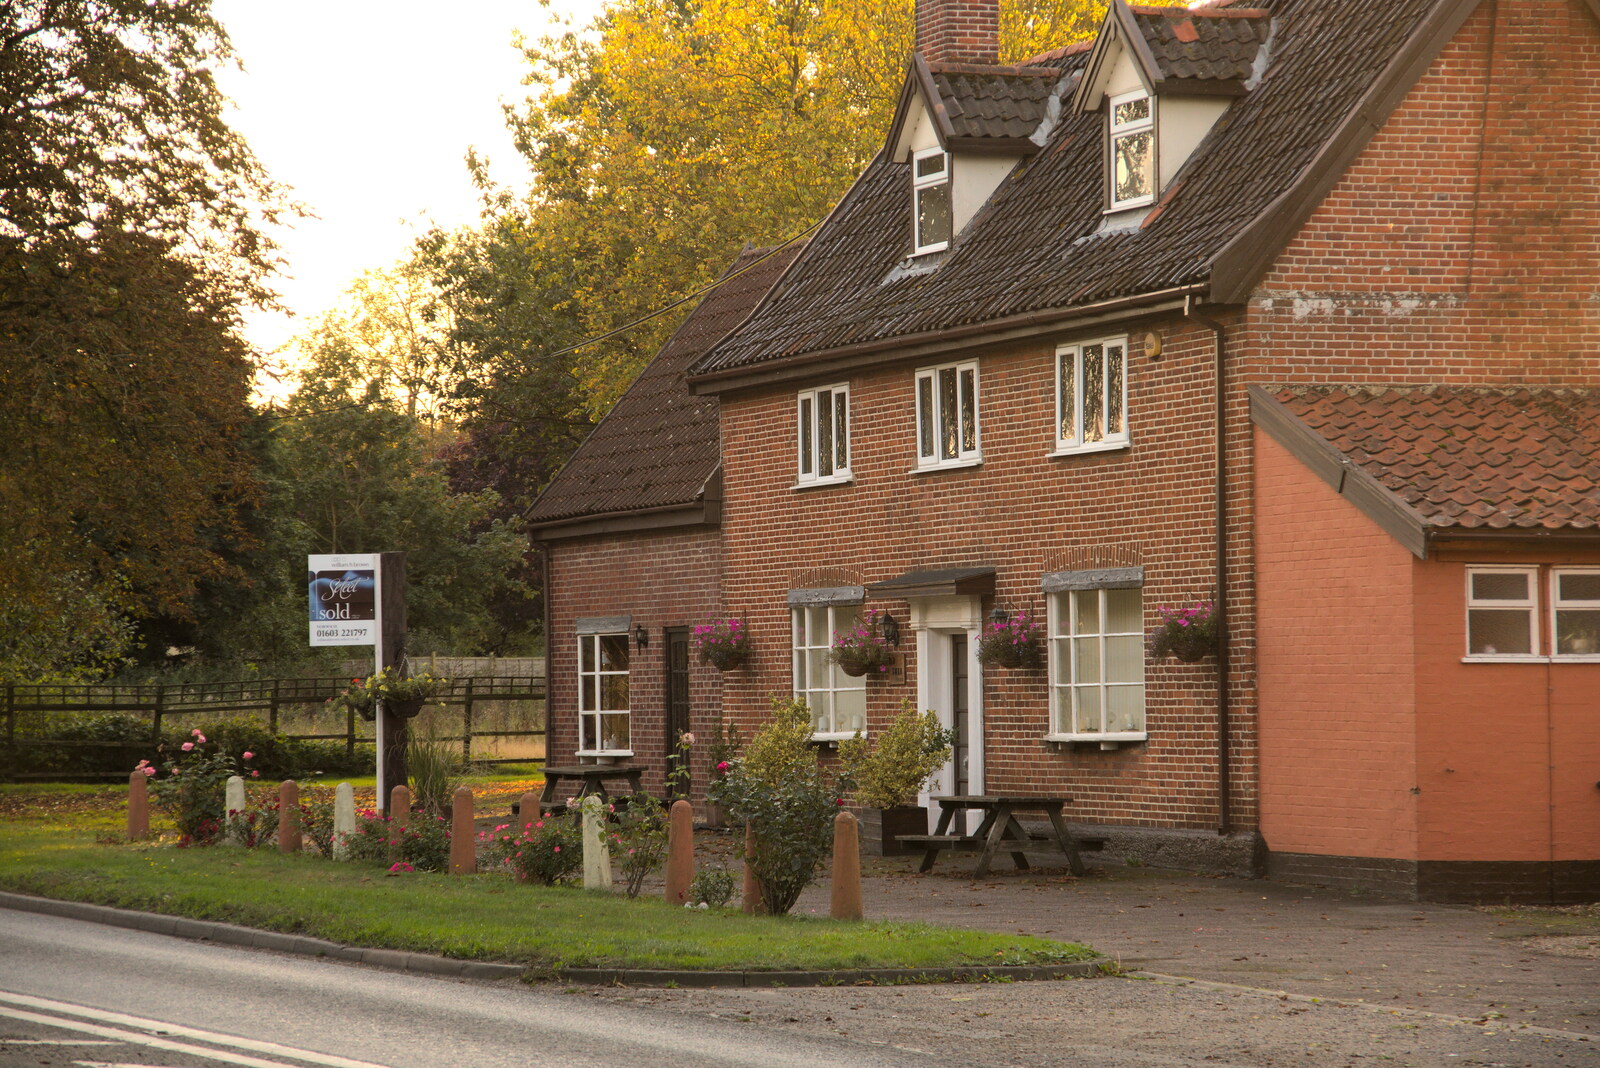 There's no way back as the Swan has been sold from Sunday Lunch at the Village Hall, Brome, Suffolk - 10th October 2021